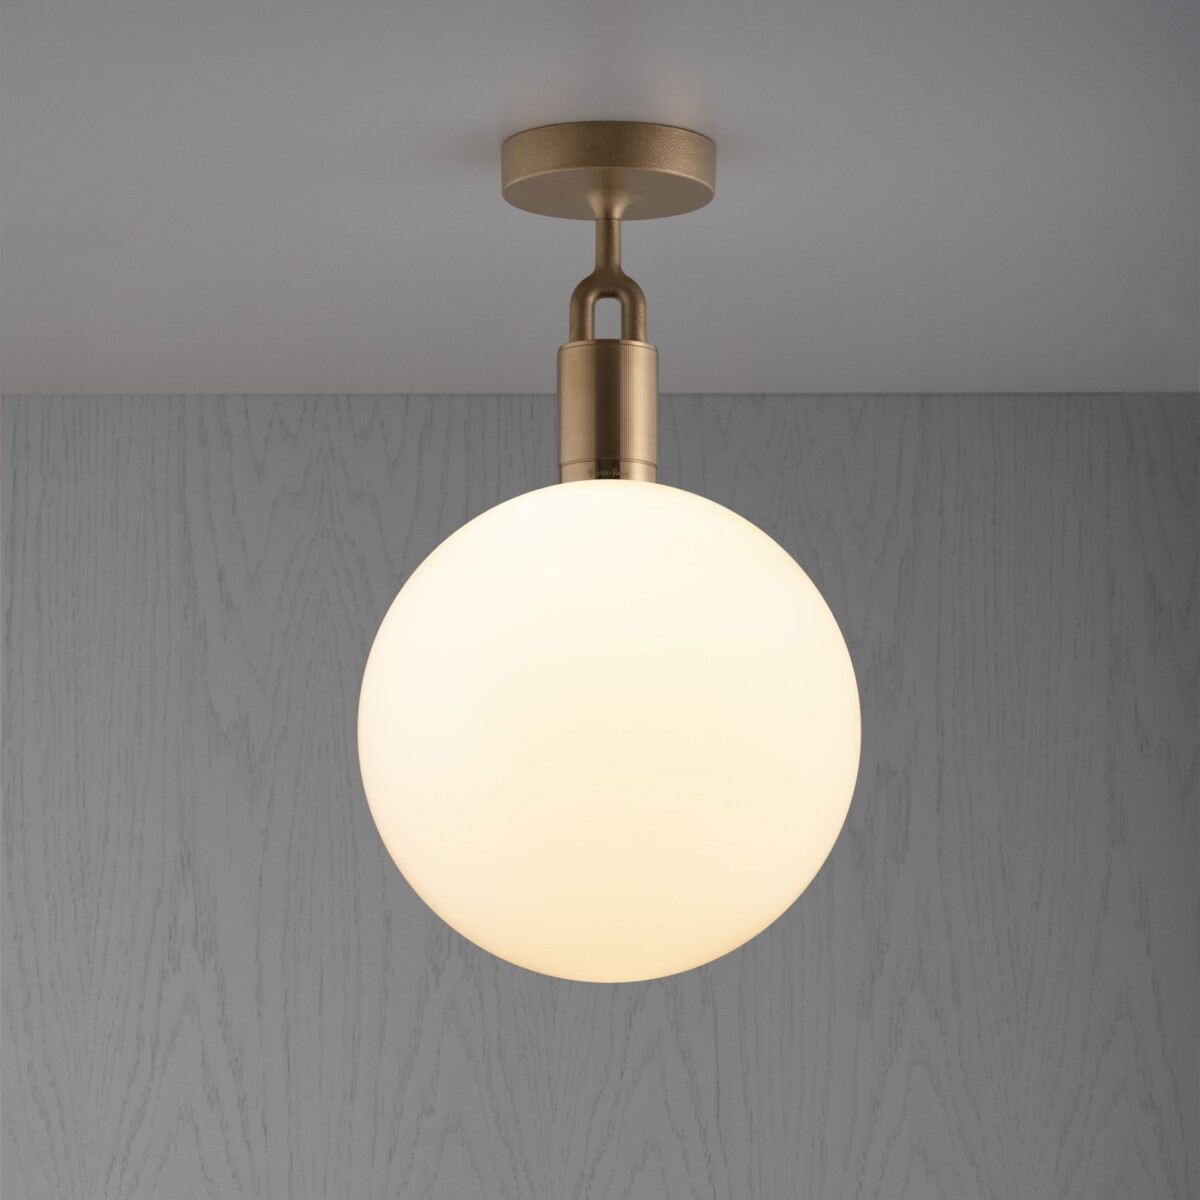 Forked_lighting_Ceiling_Brass_Large_Opal_Globe_Web-scaled